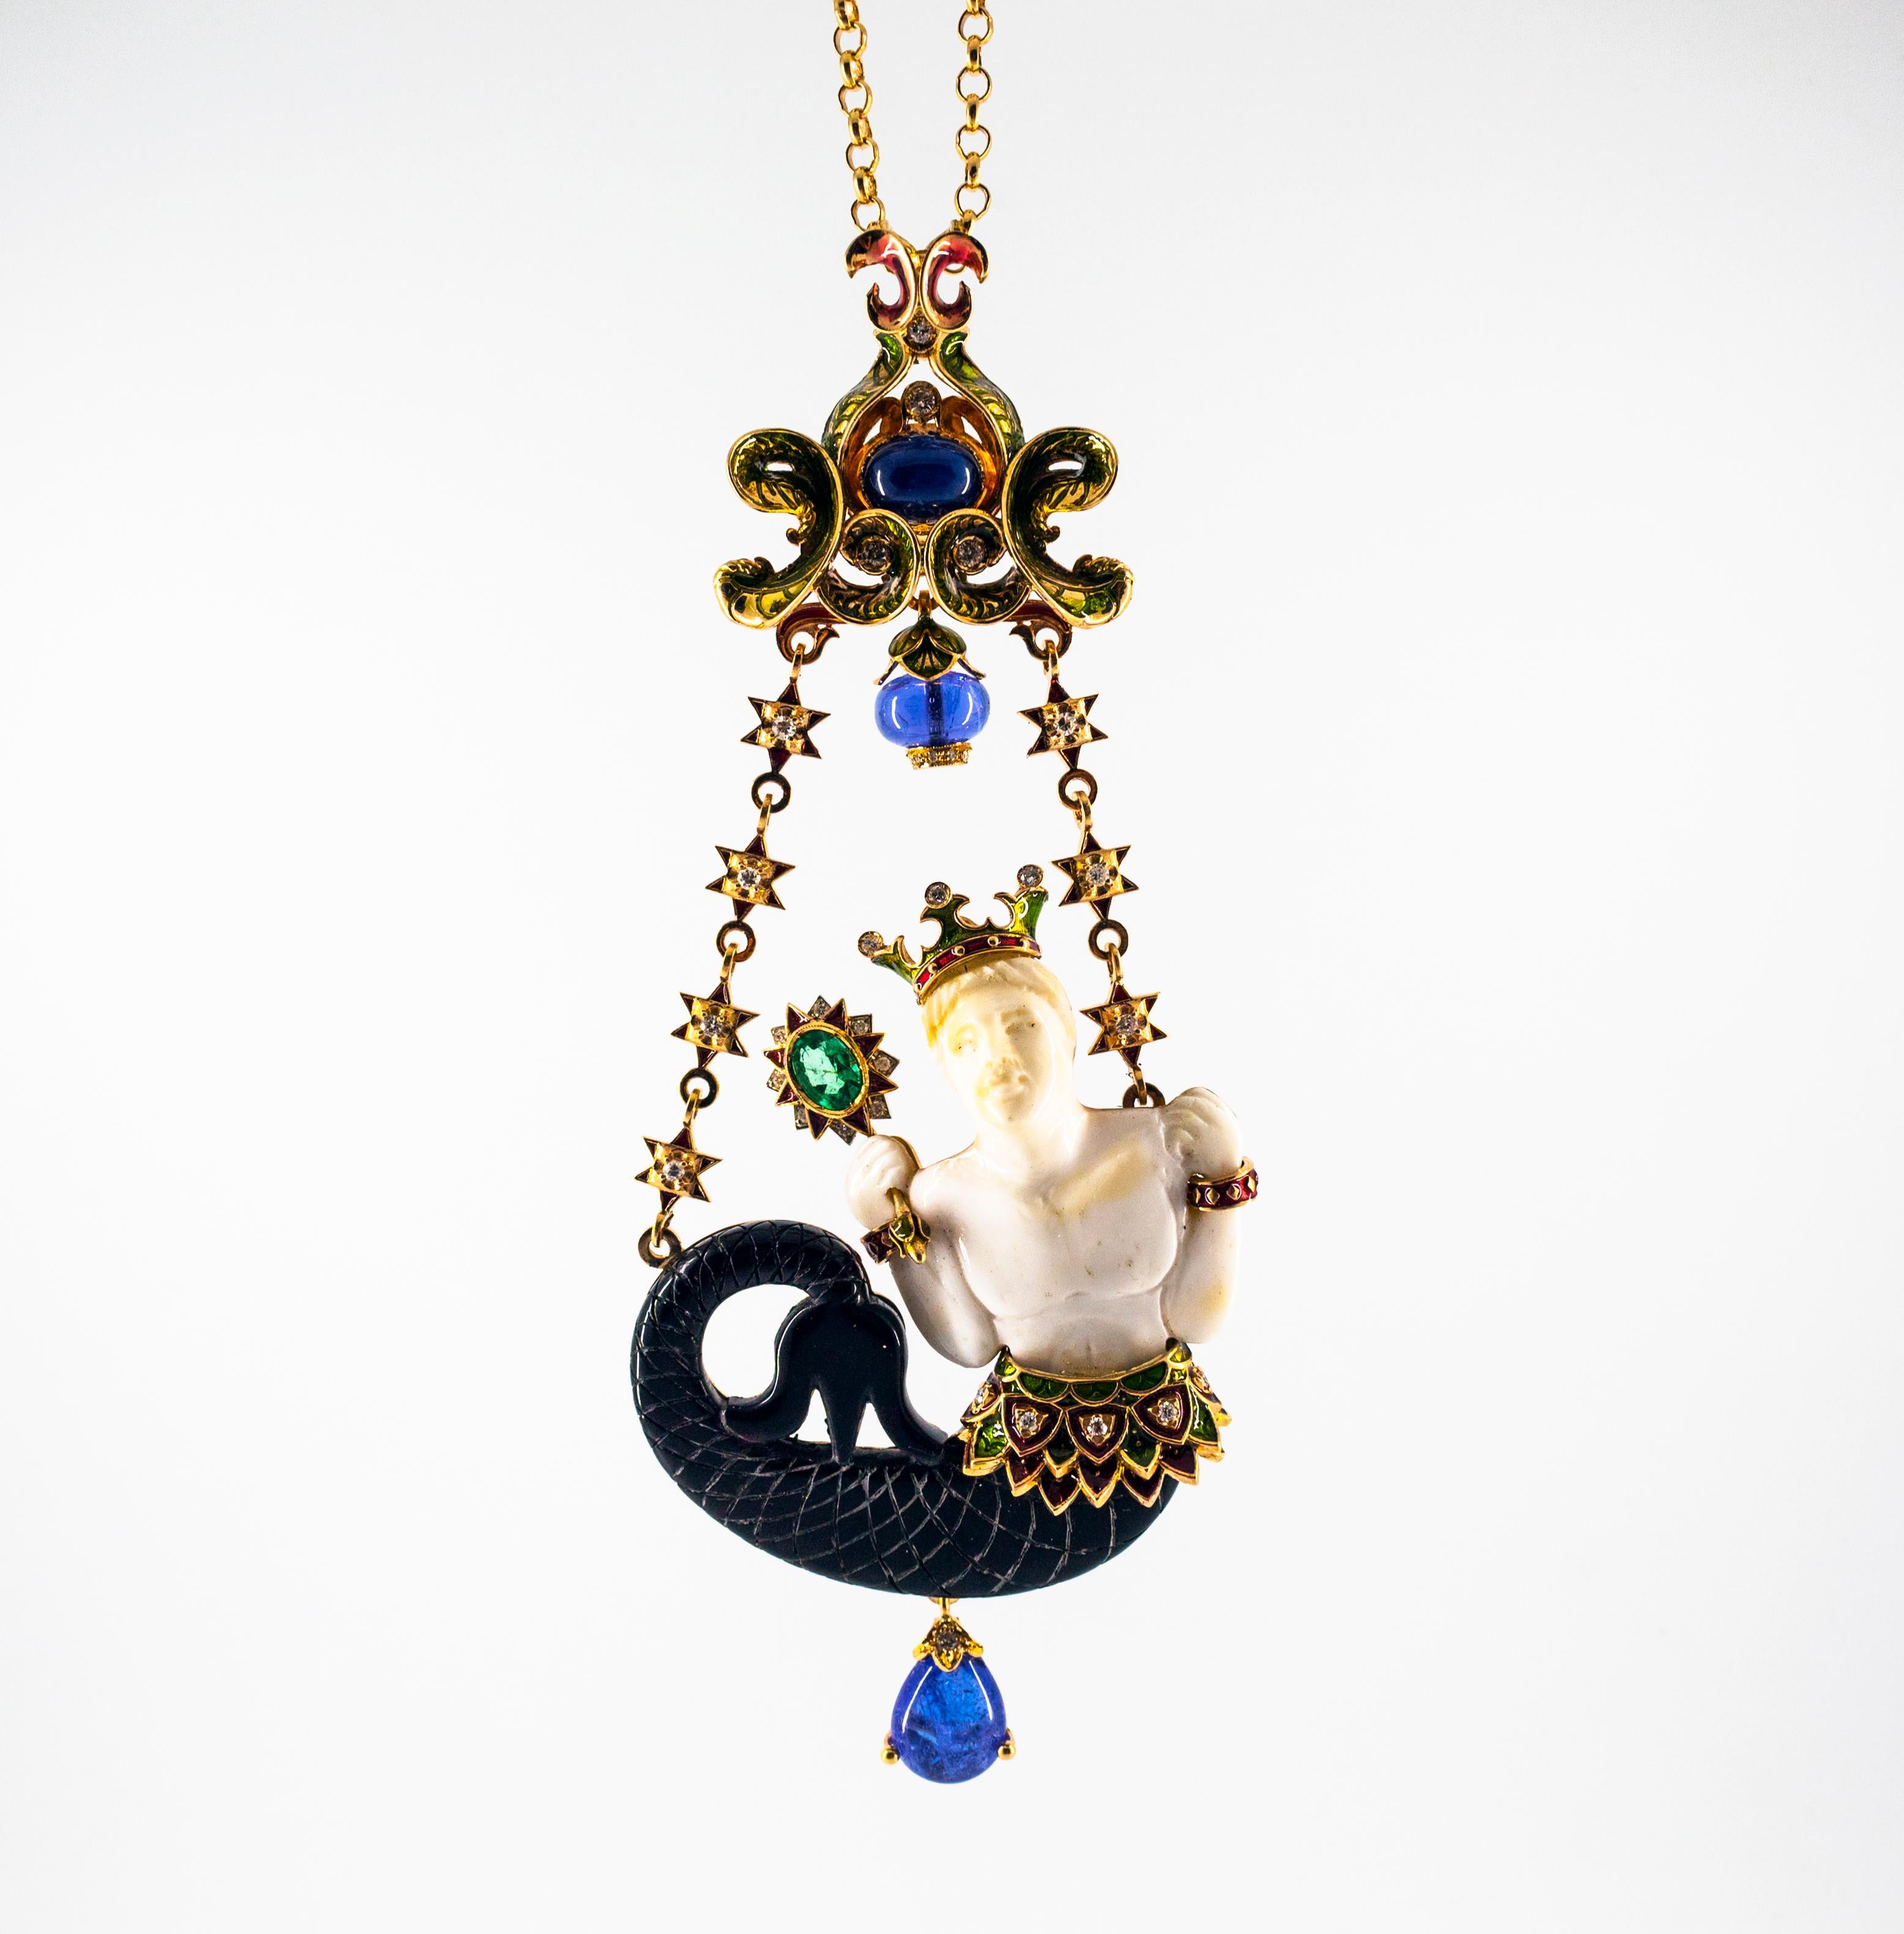 This Necklace is made of 14K Yellow Gold.
This Necklace has 1.00 Carats of White Brilliant Cut Diamonds.
This Necklace has a 3.21 Carats Blue Cabochon Cut Sapphire.
This Necklace has a 0.82 Carats Oval Cut Emerald.
This Necklace has 29.50 Carats of